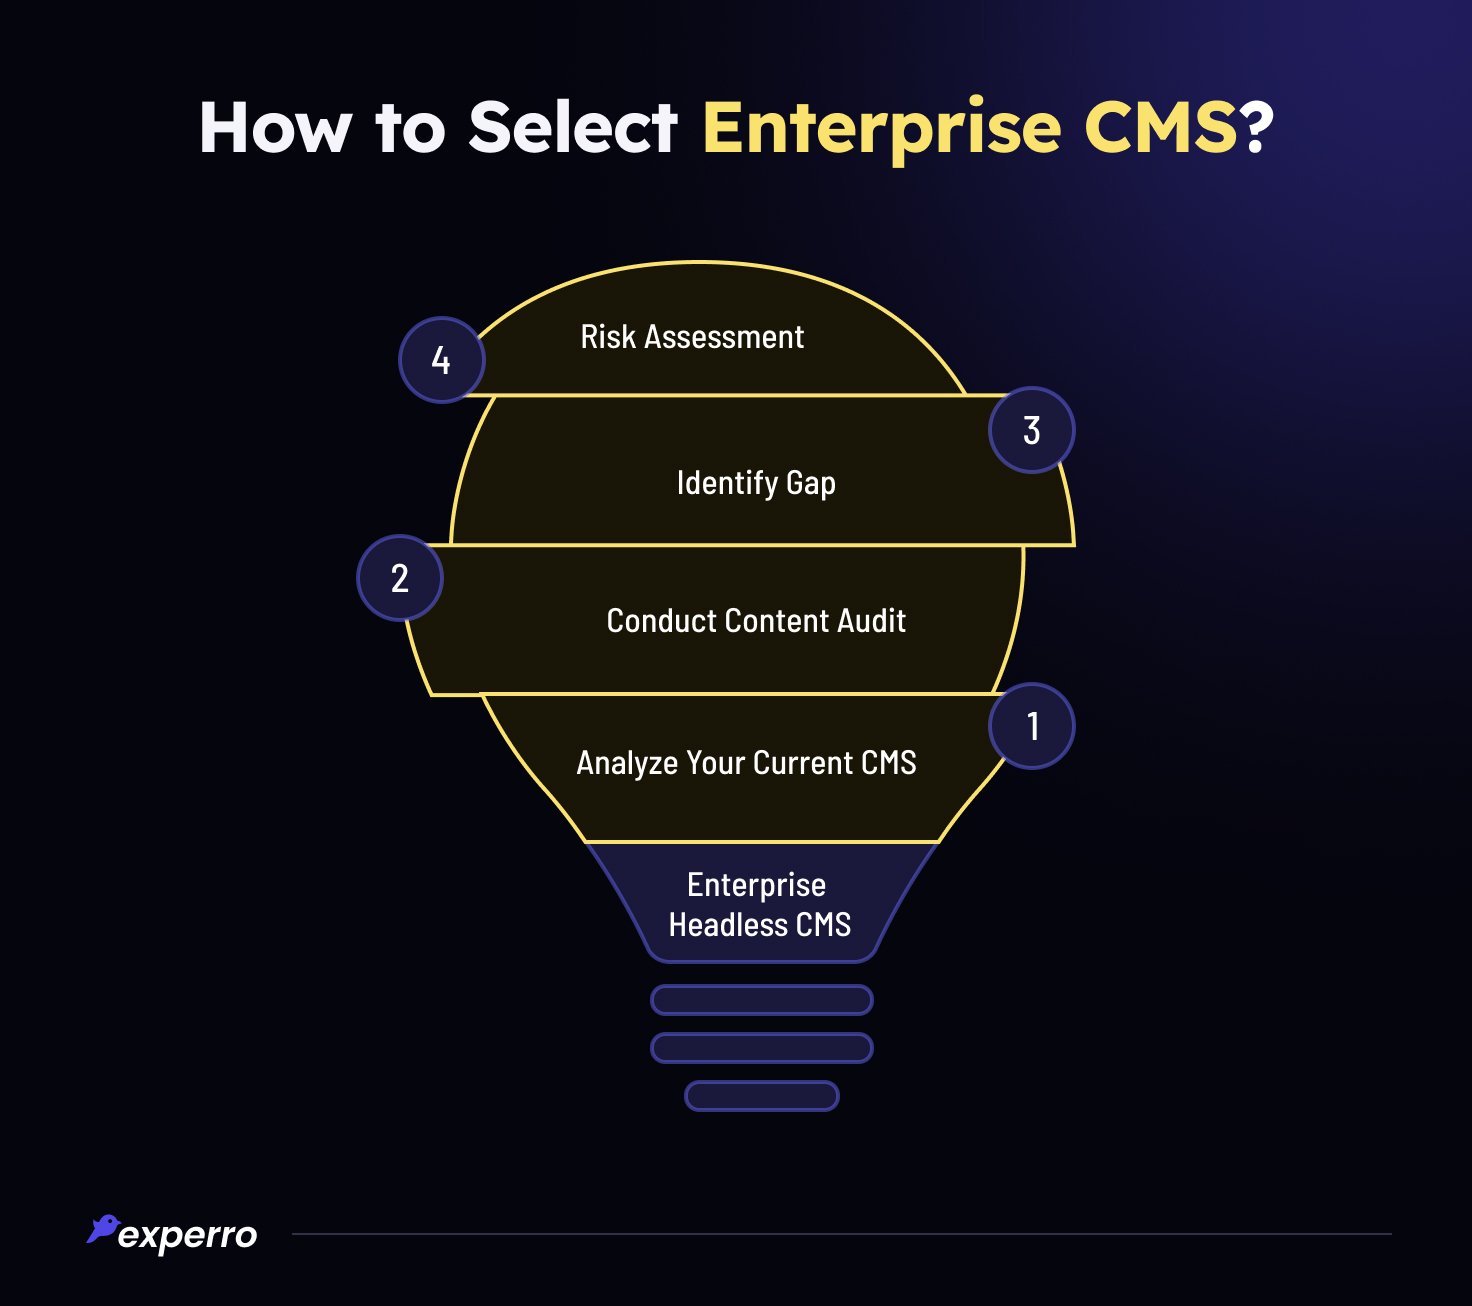 How to Select Enterprise CMS